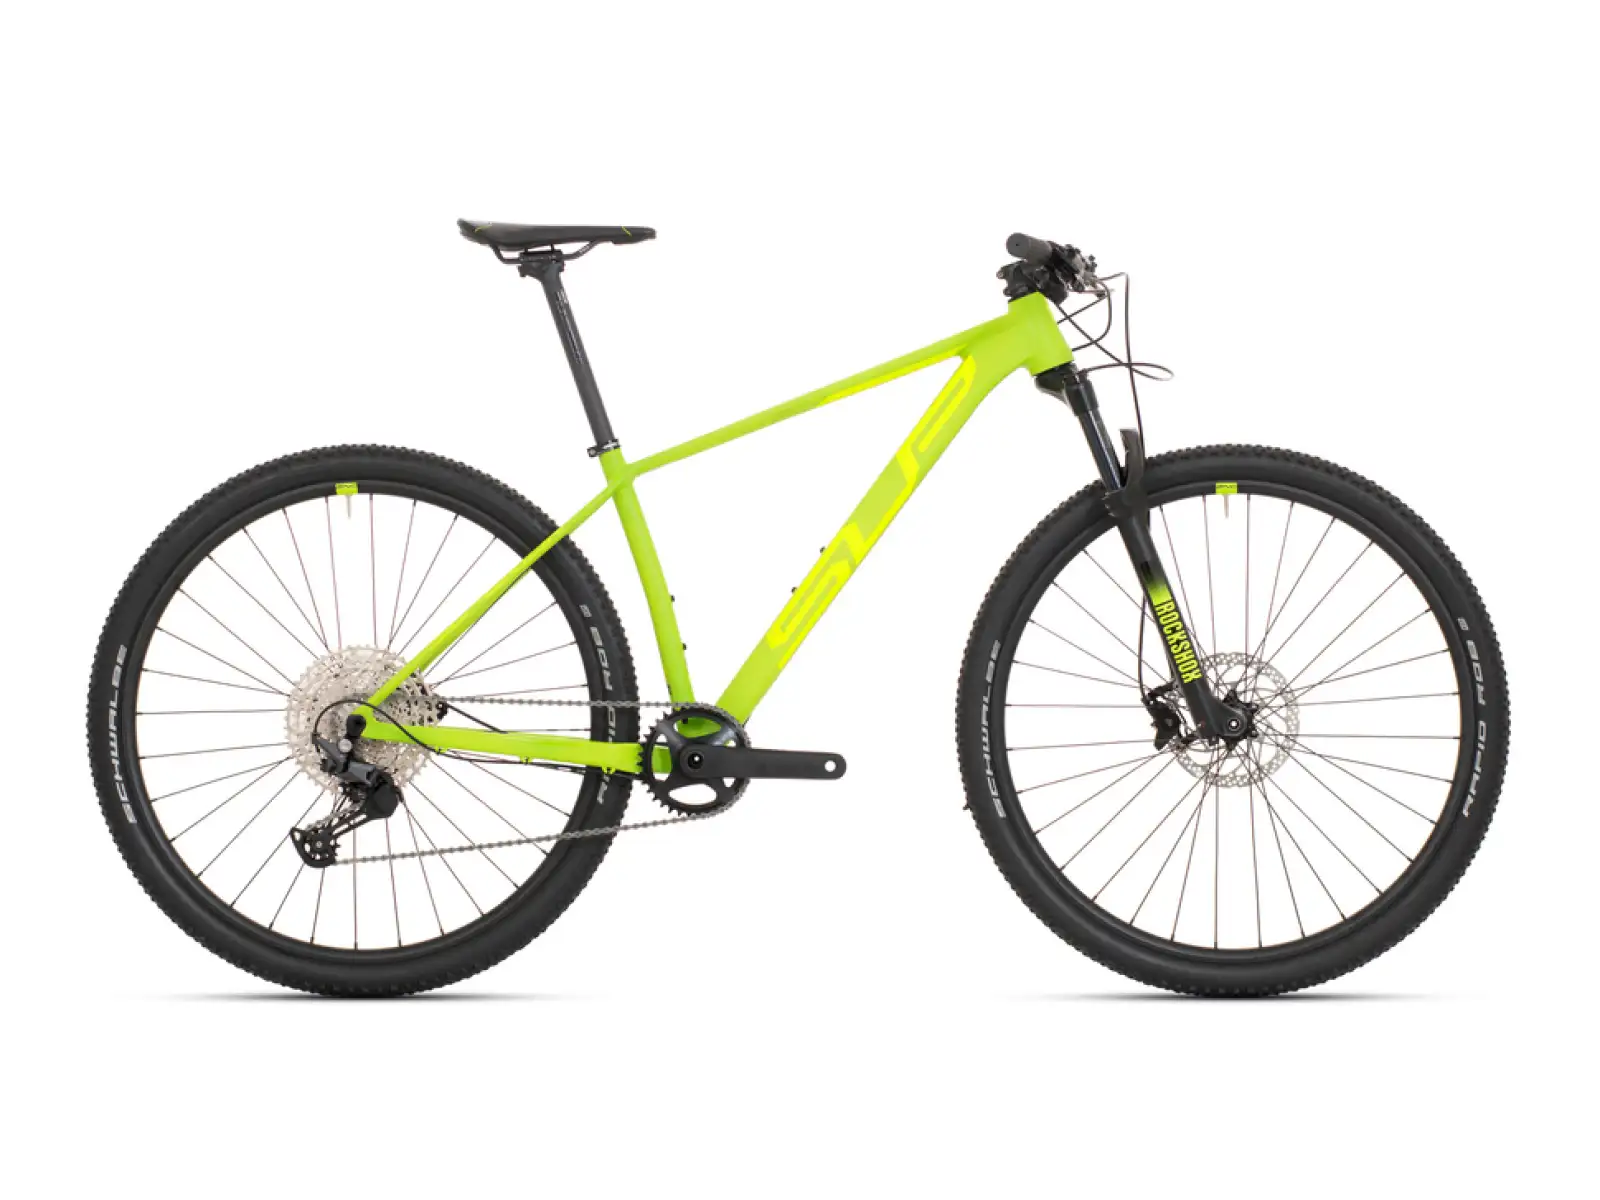 Horský bicykel Superior XP 909 2021 Matte Lime/Neon Yellow